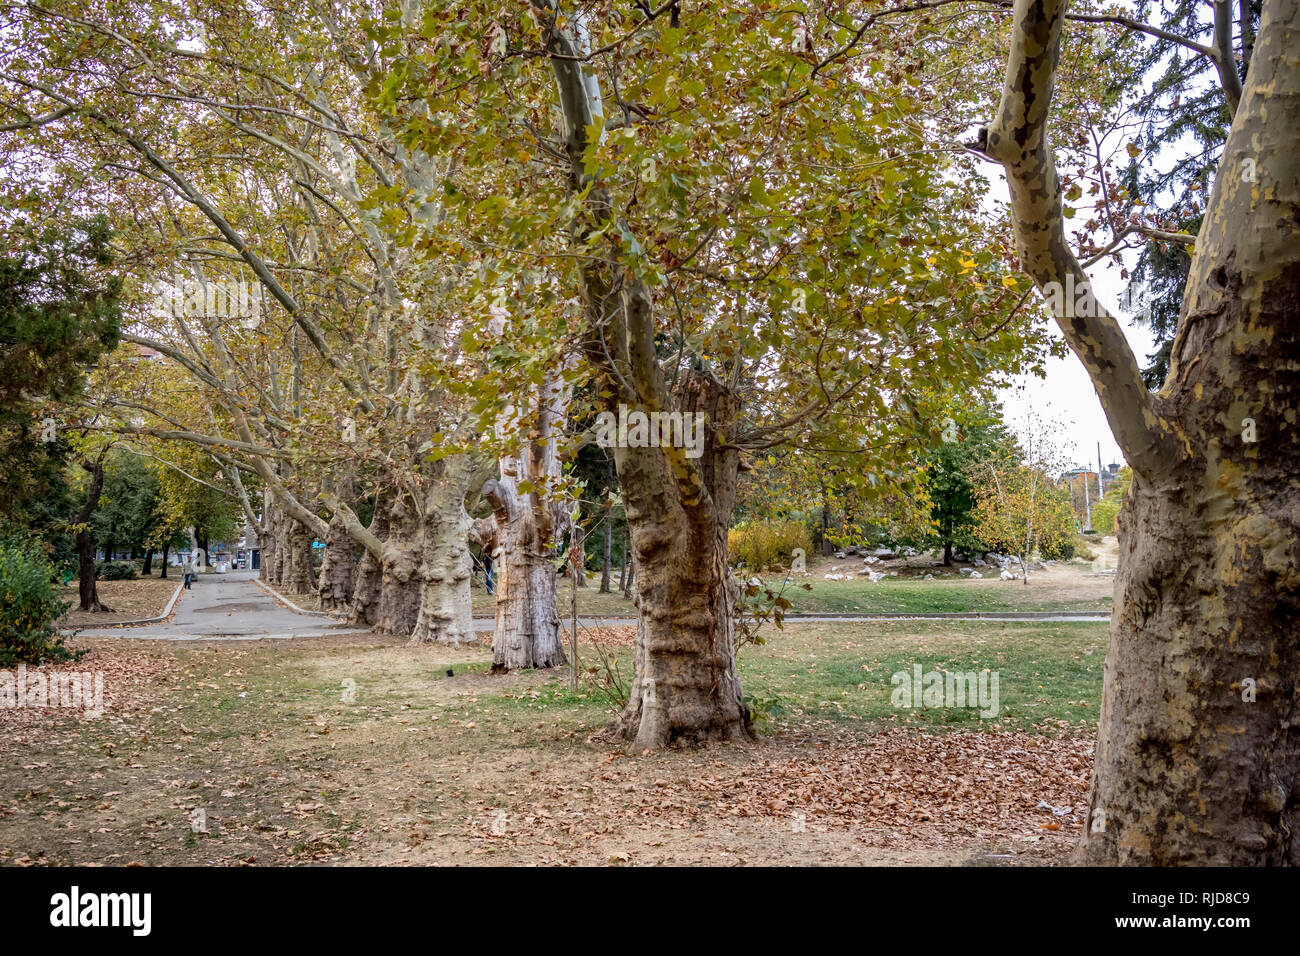 SOFIA, BULGARIA - OCTOBER 14, 2018: Knyazheska Garden with rows of maple trees is almost empty in the cold fall day, central part of Bulgarian capital. Moody cloudy autumn afternoon Stock Photo